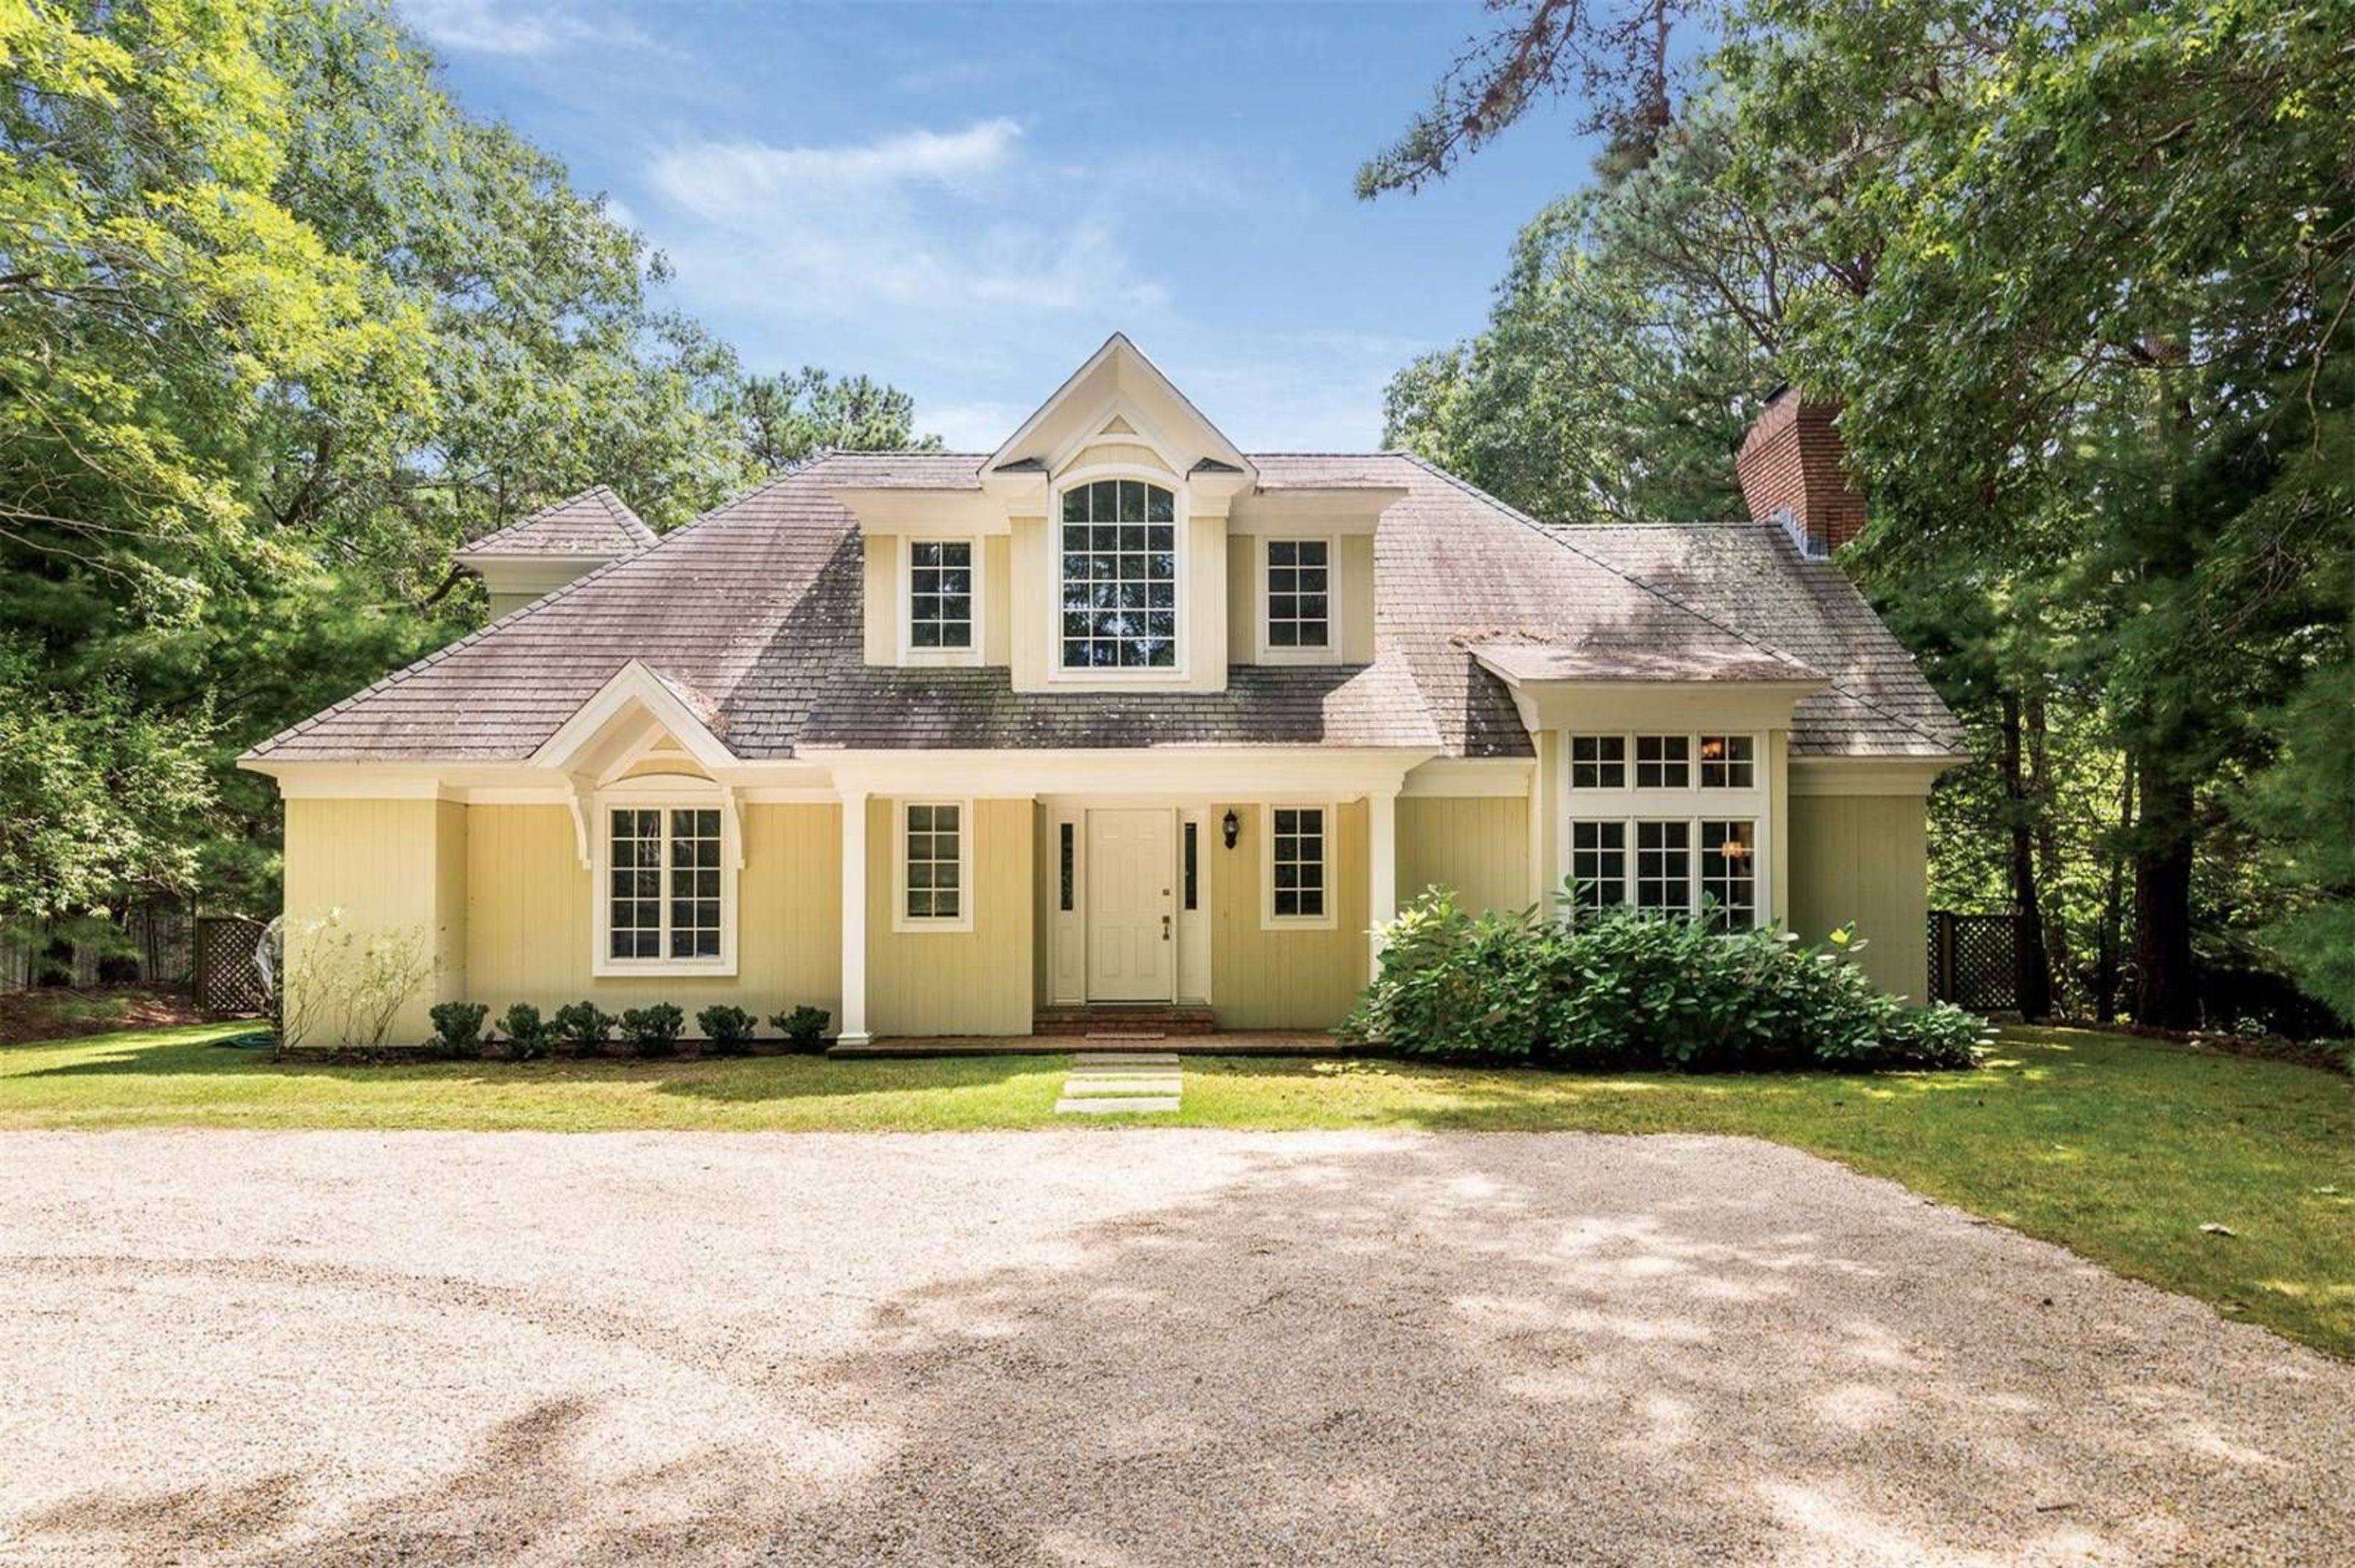 Fabulous Wainscott With 4 Bedrooms,4.5 Bathrooms and Pool